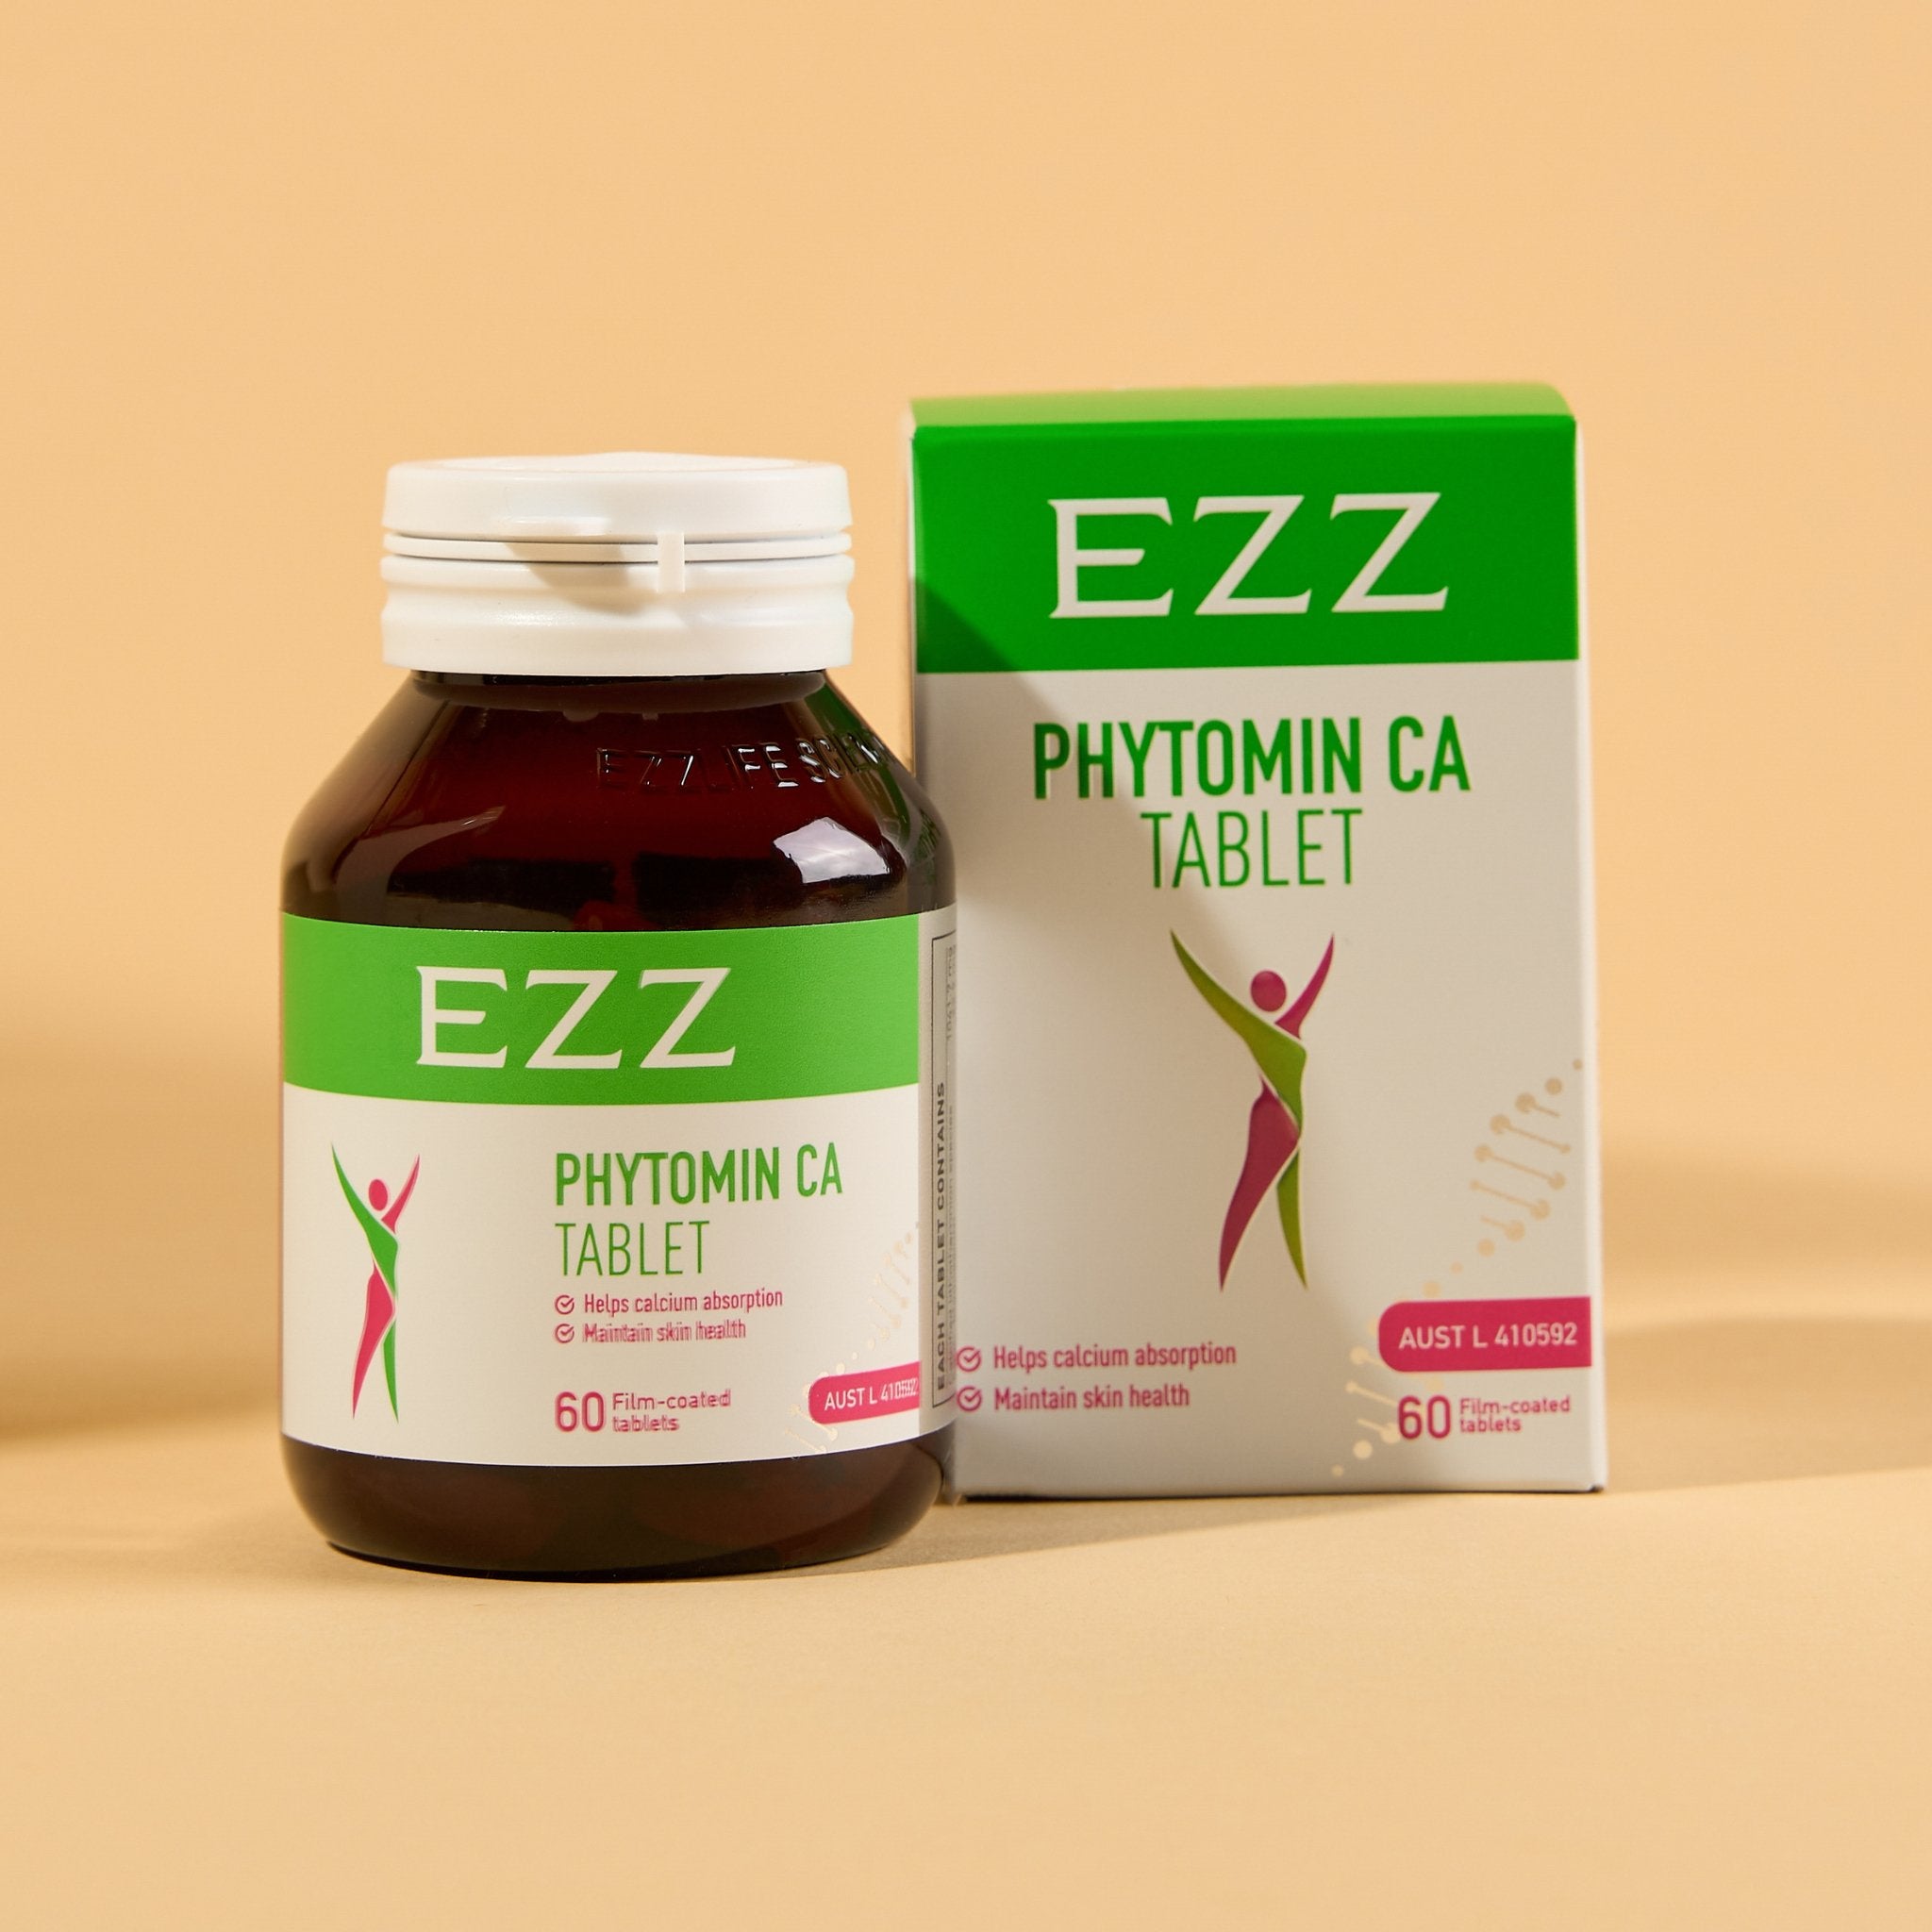 EZZ Phytomin CA Tablet - EZZ OFFICIAL